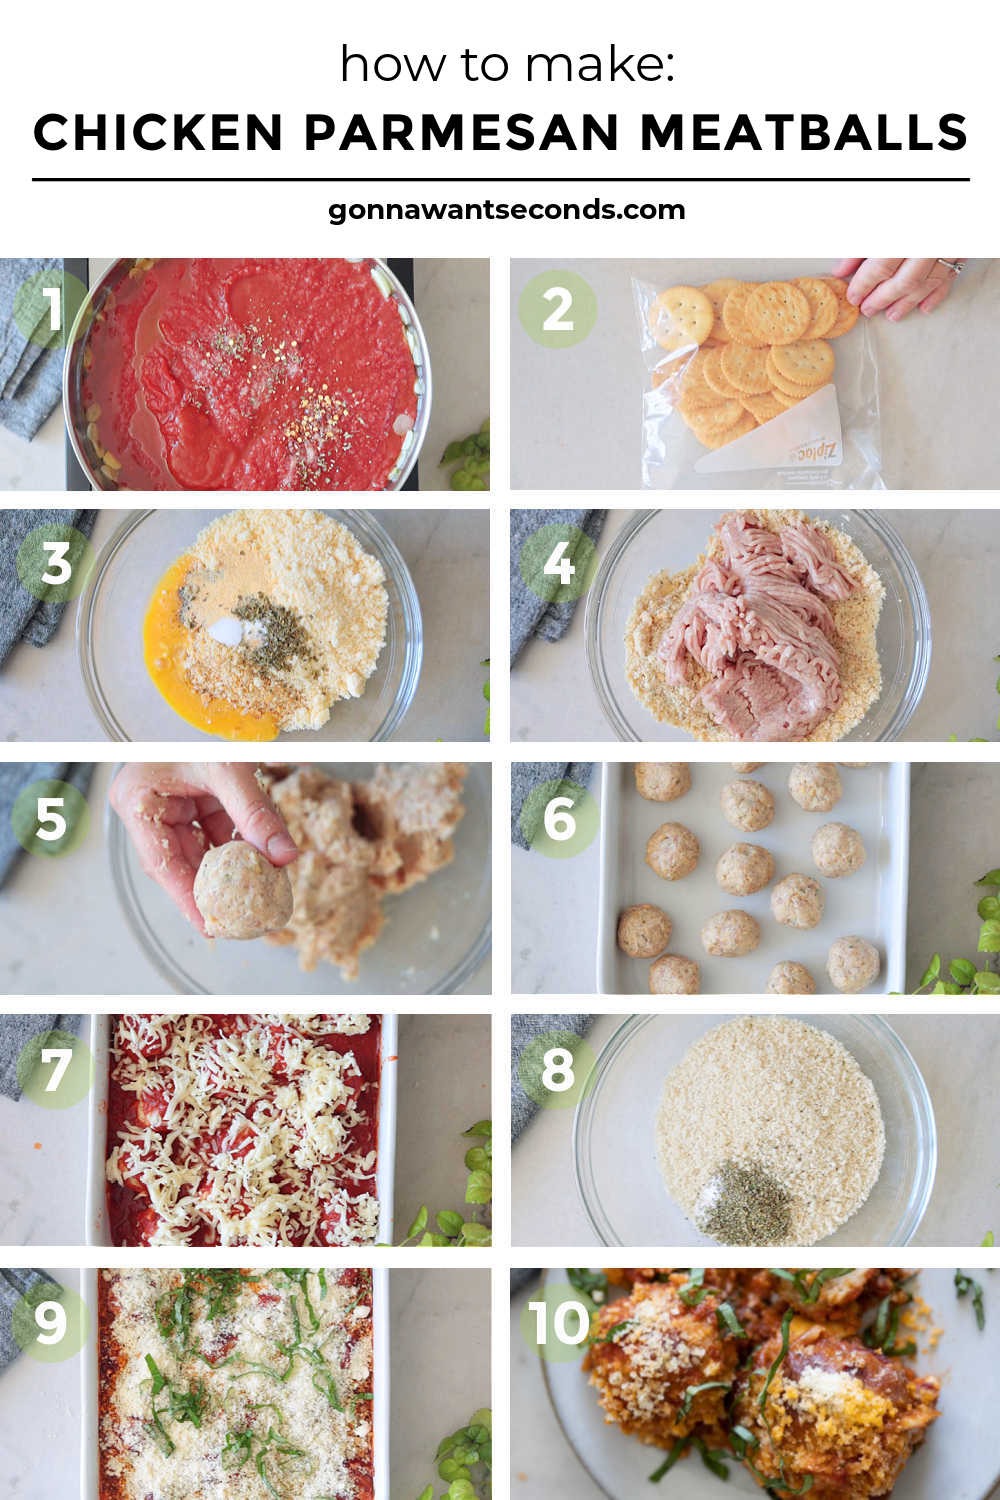 Step by step how to make chicken parmesan meatballs